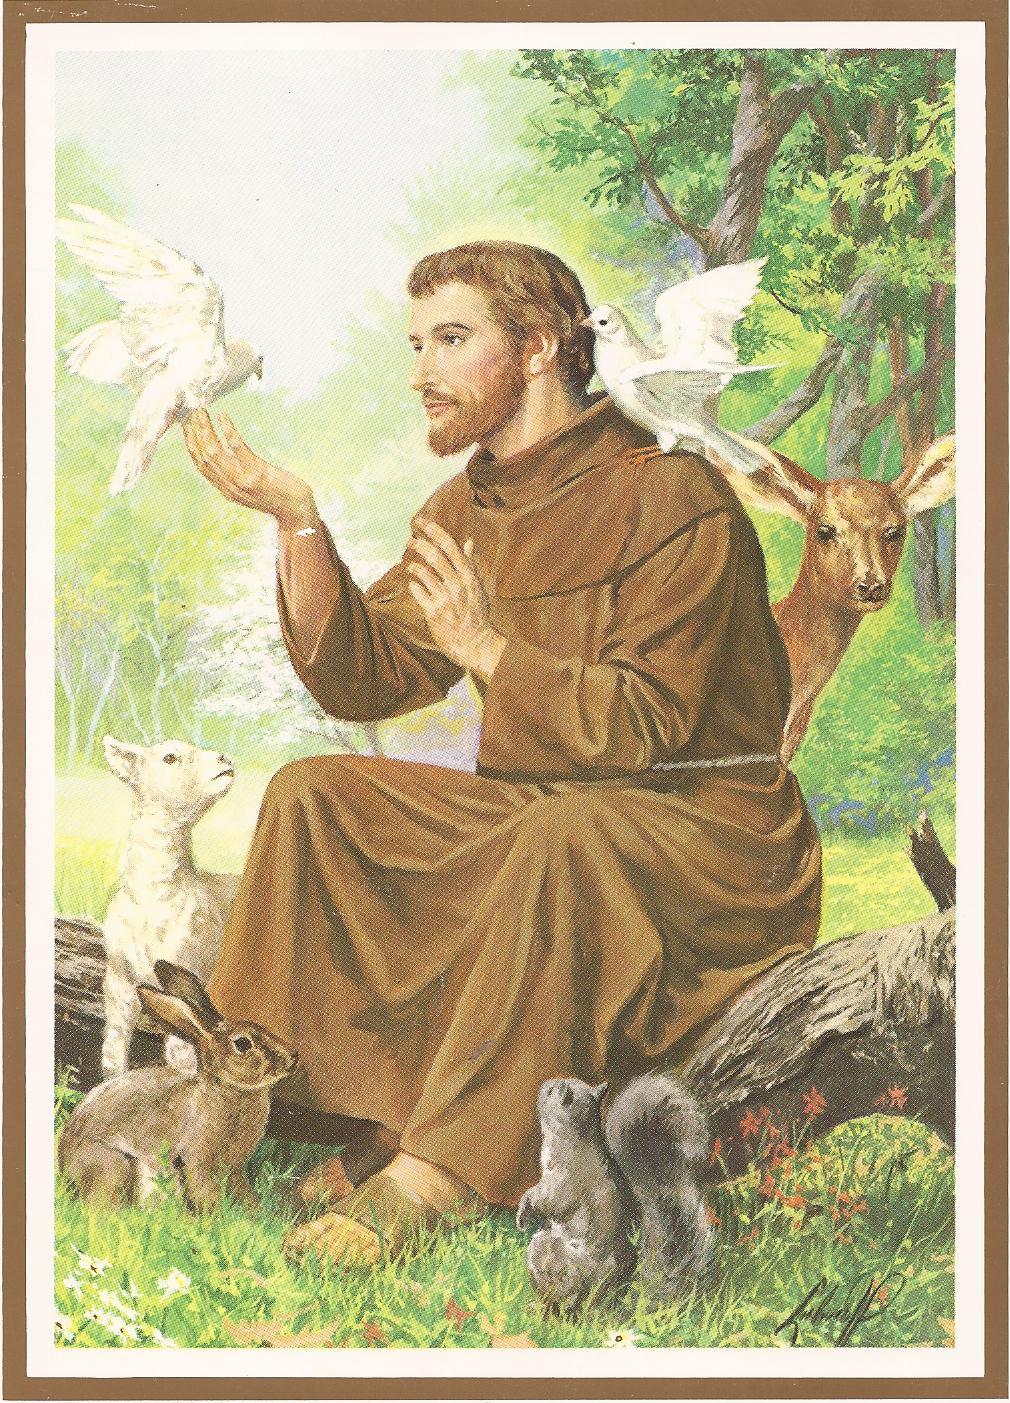 ST. FRANCIS OF ASSISI PET BLESSING We invite our parishioners to bring their pets by the Grotto of Our Lady of Grace near the parking lot for a solemn blessing of